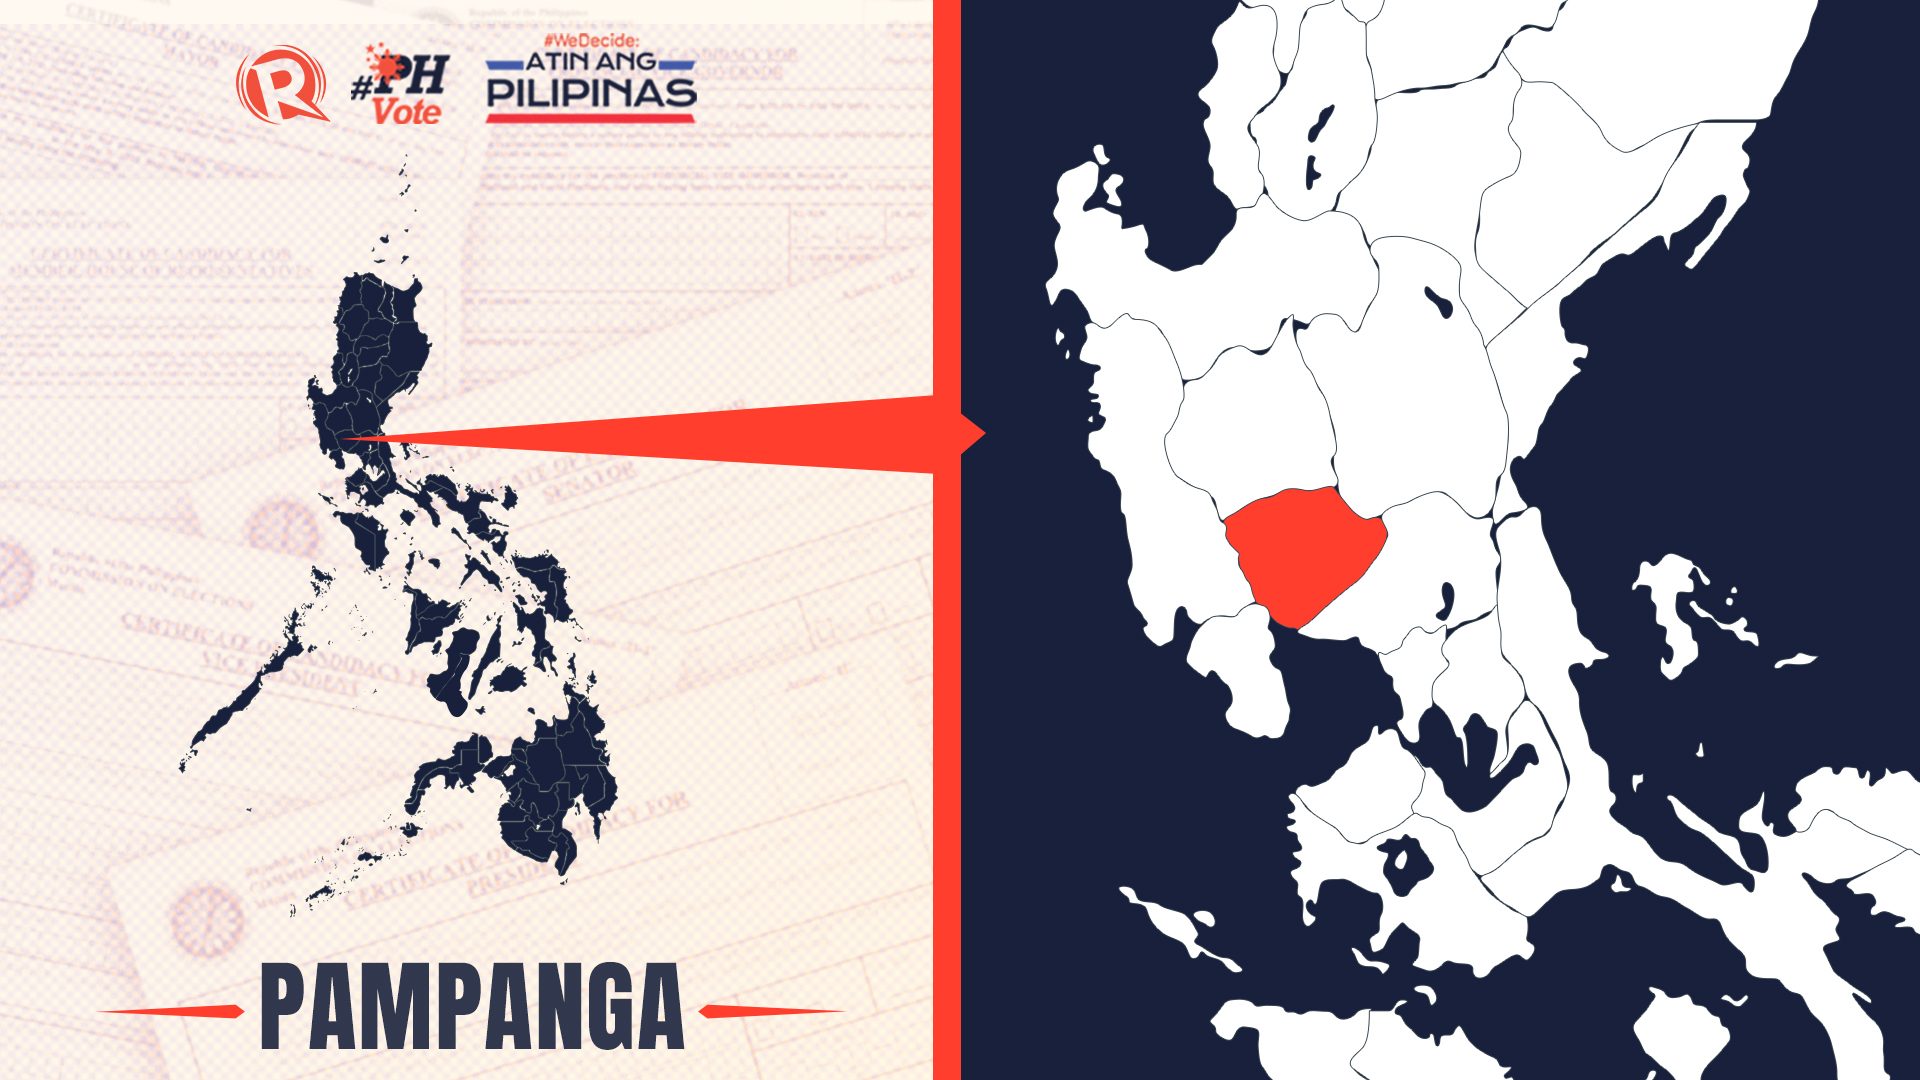 LIST: Who is running in Pampanga in the 2022 Philippine elections?